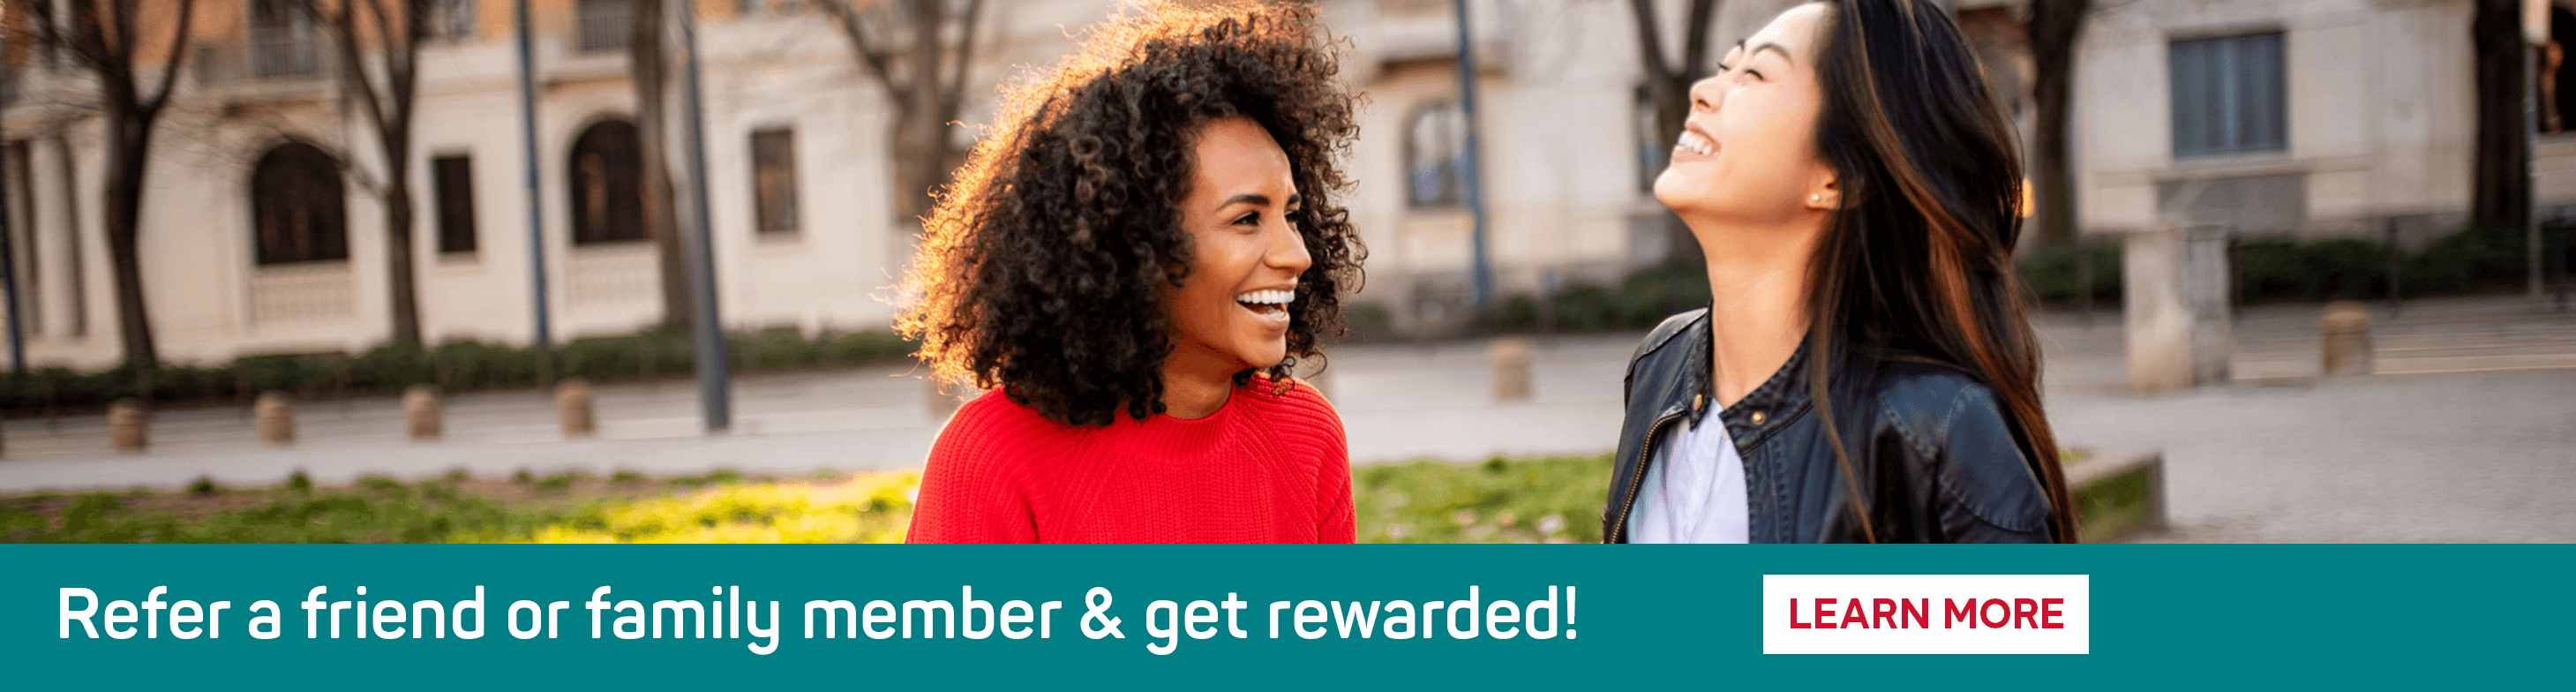 Refer a friend or family member & get rewarded!